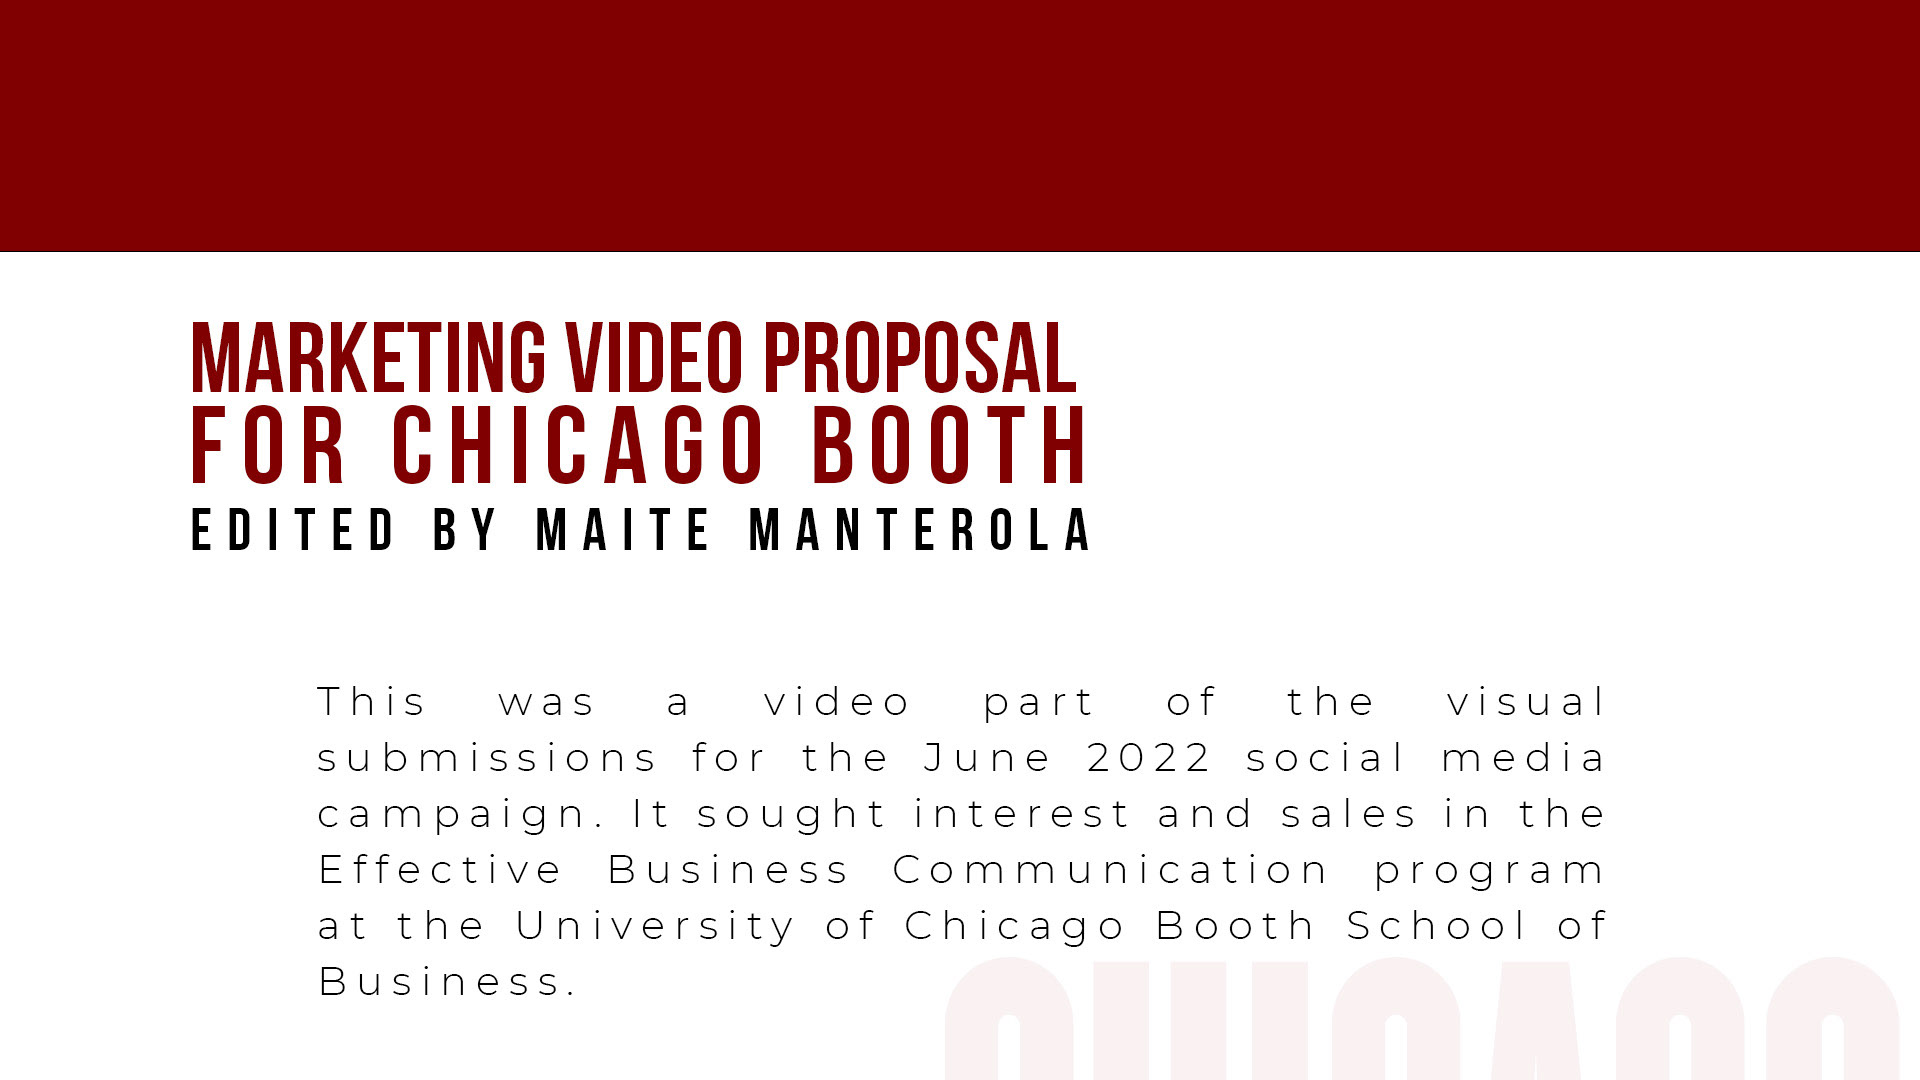 Promotions  The University of Chicago Booth School of Business